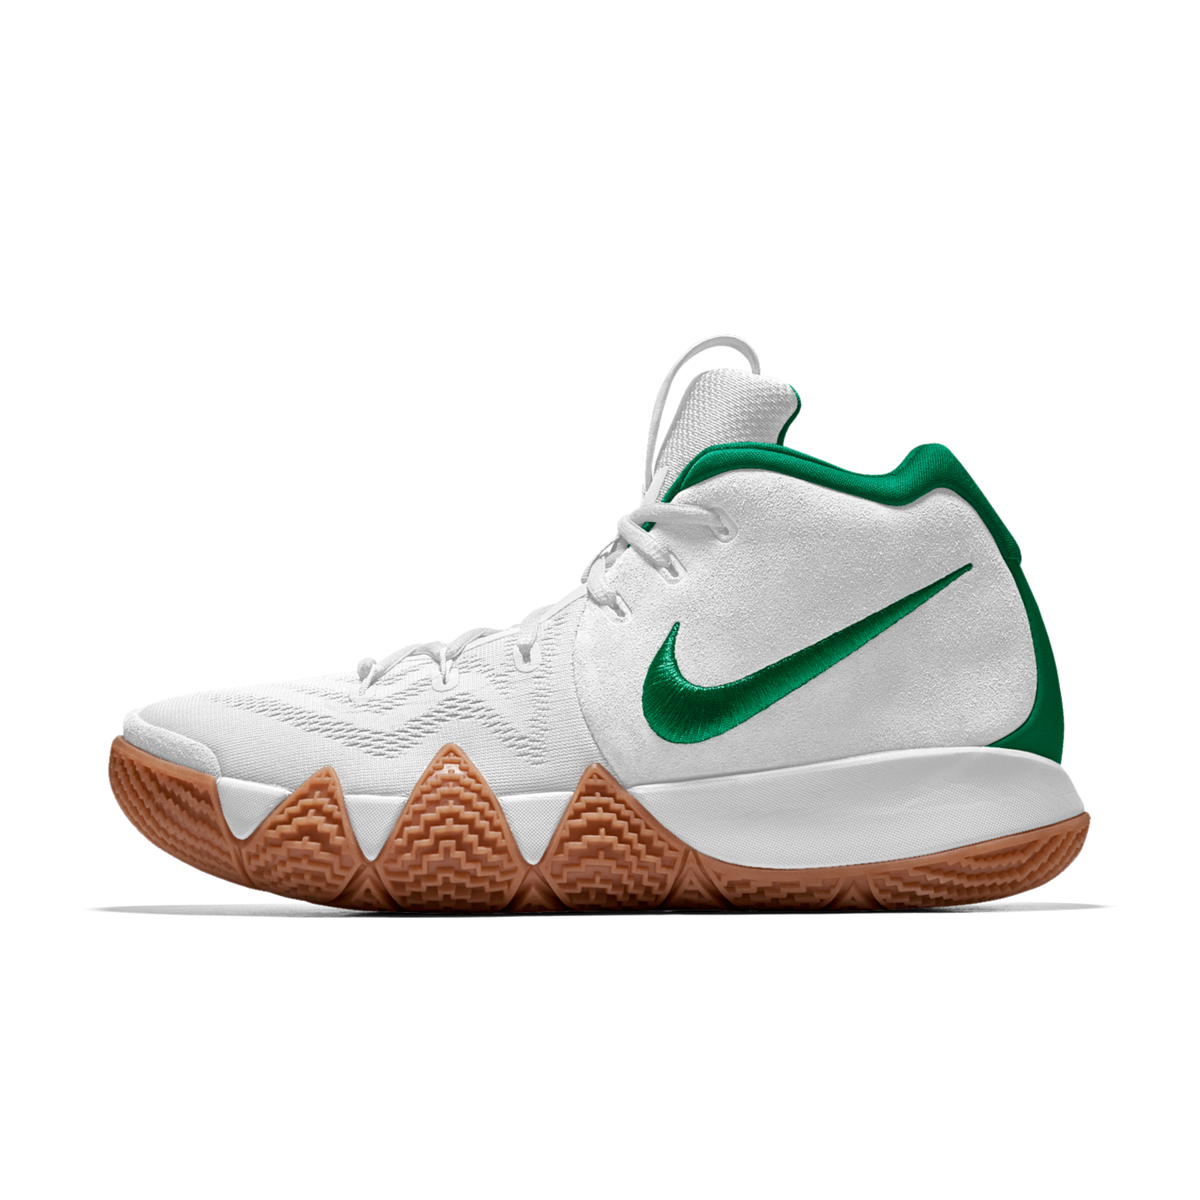 kyrie 4 sole